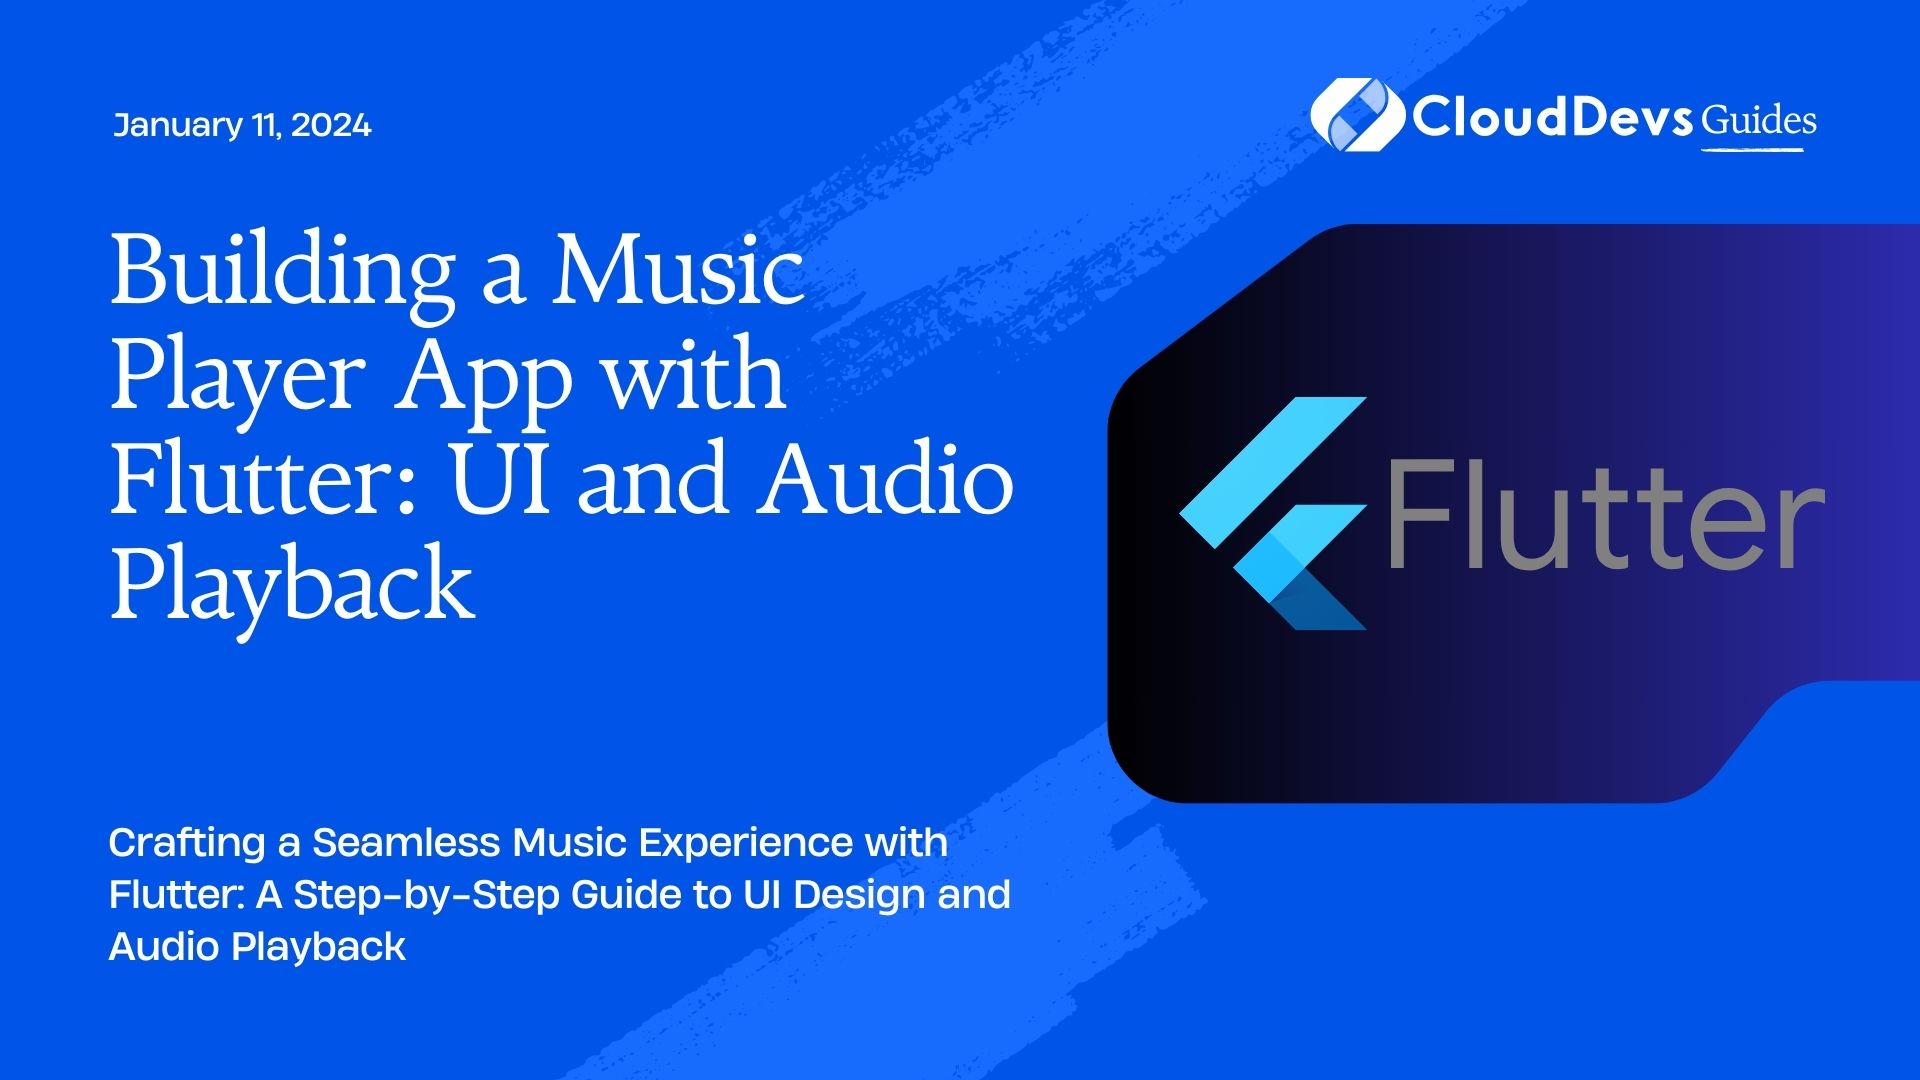 Building a Music Player App with Flutter: UI and Audio Playback